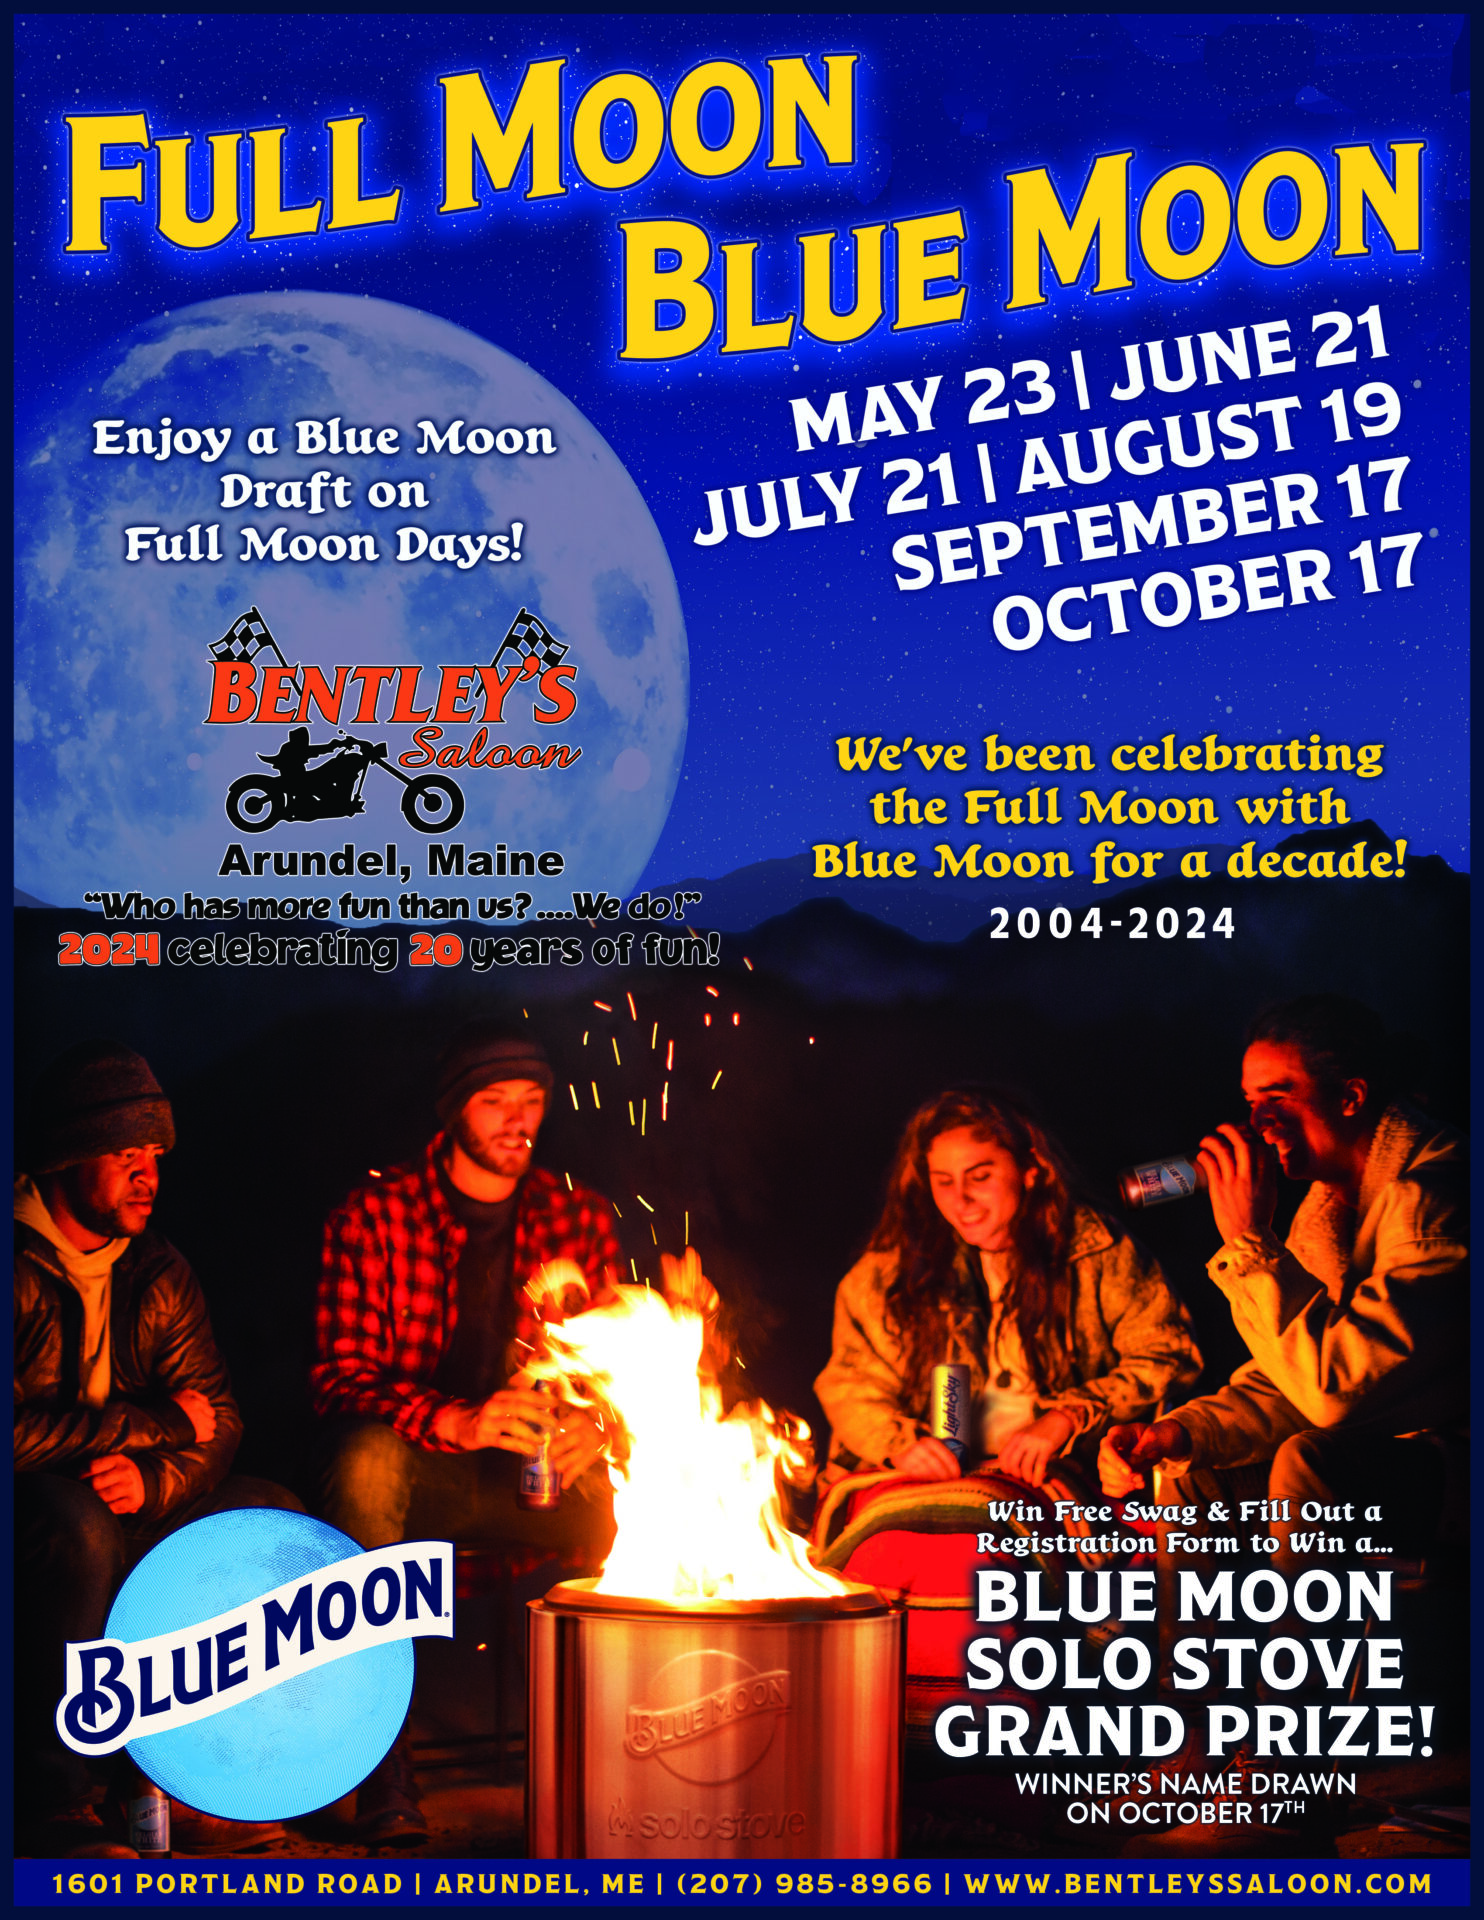 A poster of the full moon band